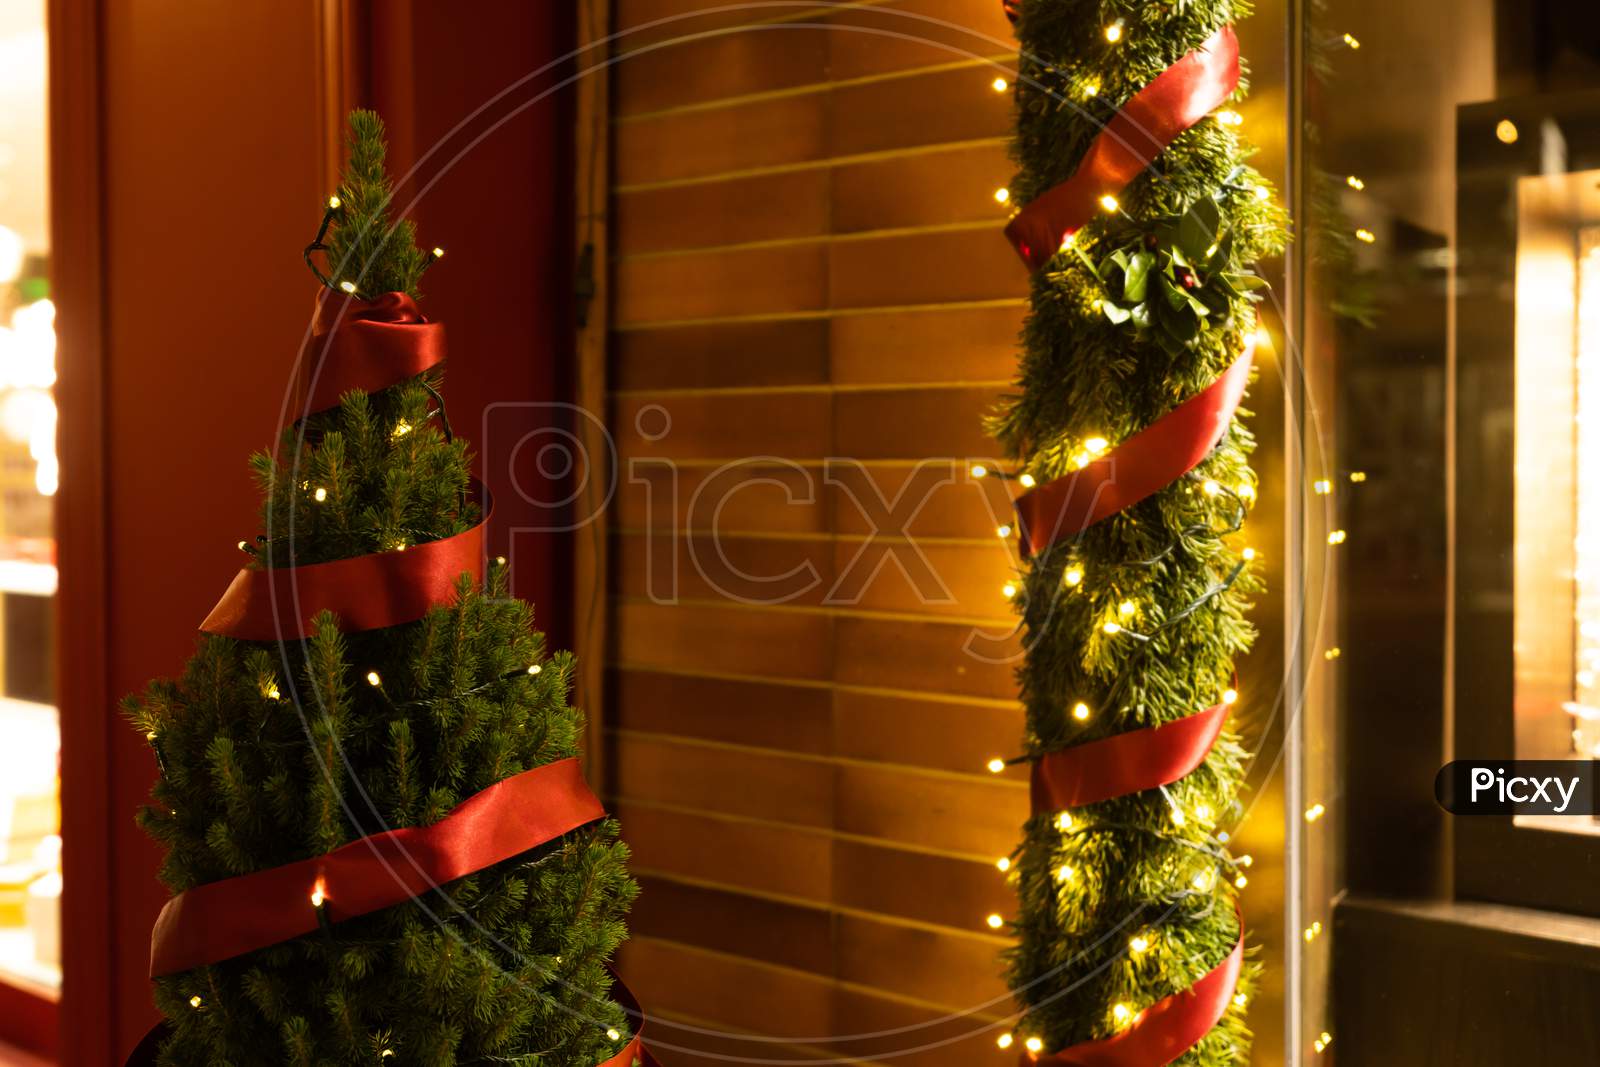 Decorated And Illuminated Store Window With Pine, Red Ribbon, Light And Garland Decoration In Dark Evening.